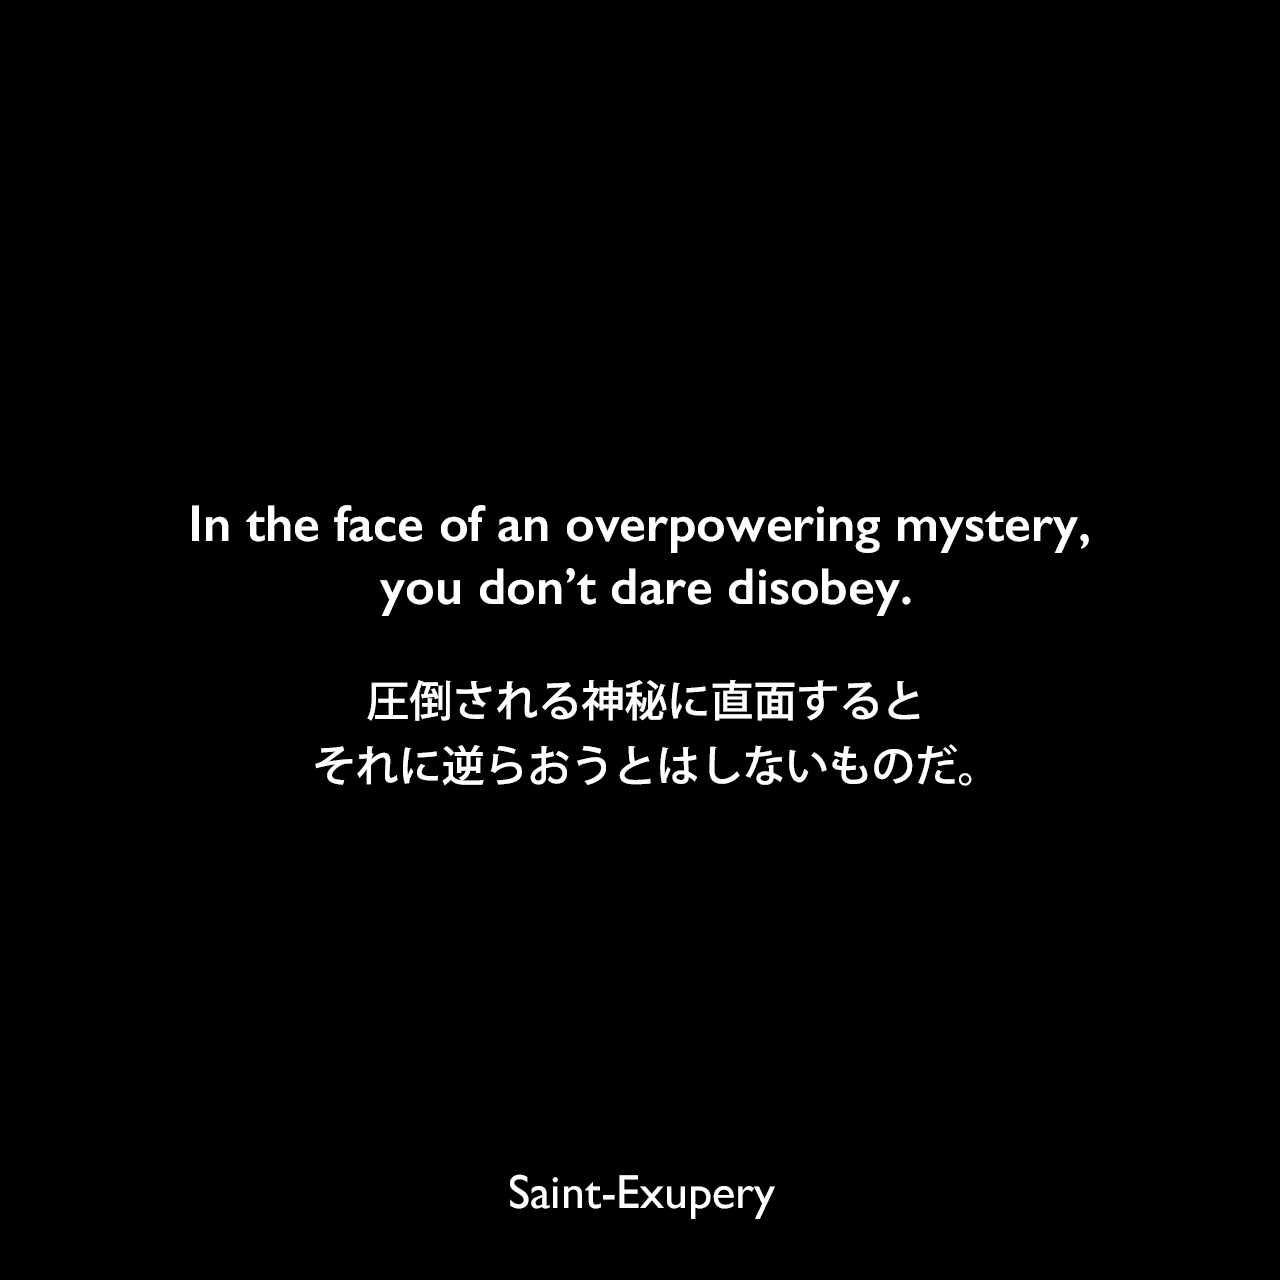 In the face of an overpowering mystery, you don’t dare disobey.圧倒される神秘に直面すると、それに逆らおうとはしないものだ。Saint-Exupery